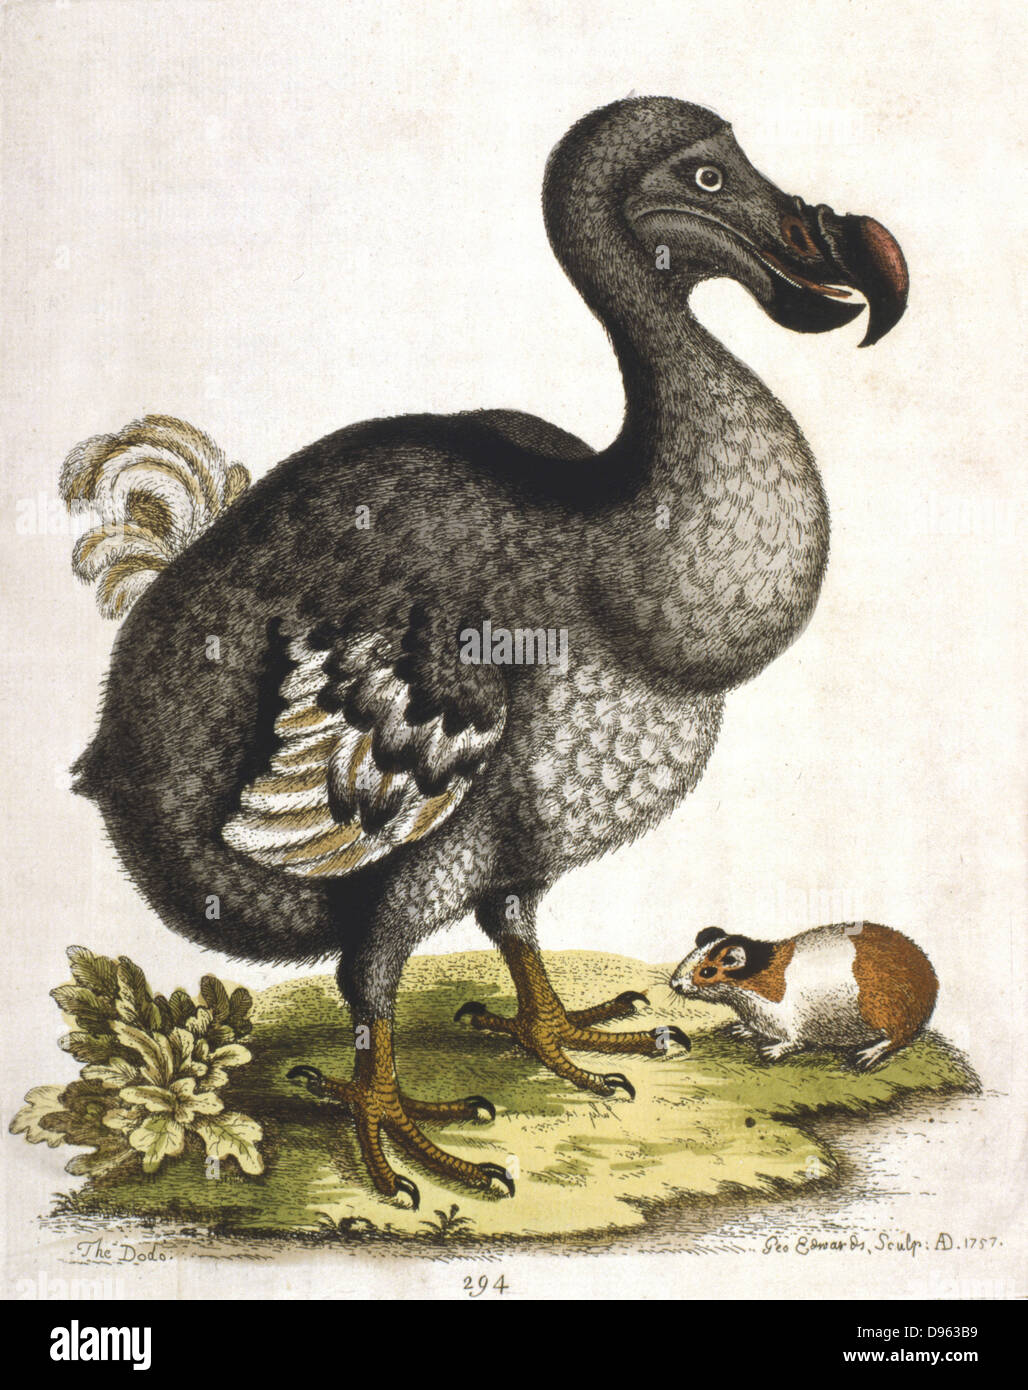 Dodo - Didus ineptus, extinct bird from Madagascar. From G. Edwards 'A Natural History of Uncommon Birds .......', London, 1750 Stock Photo